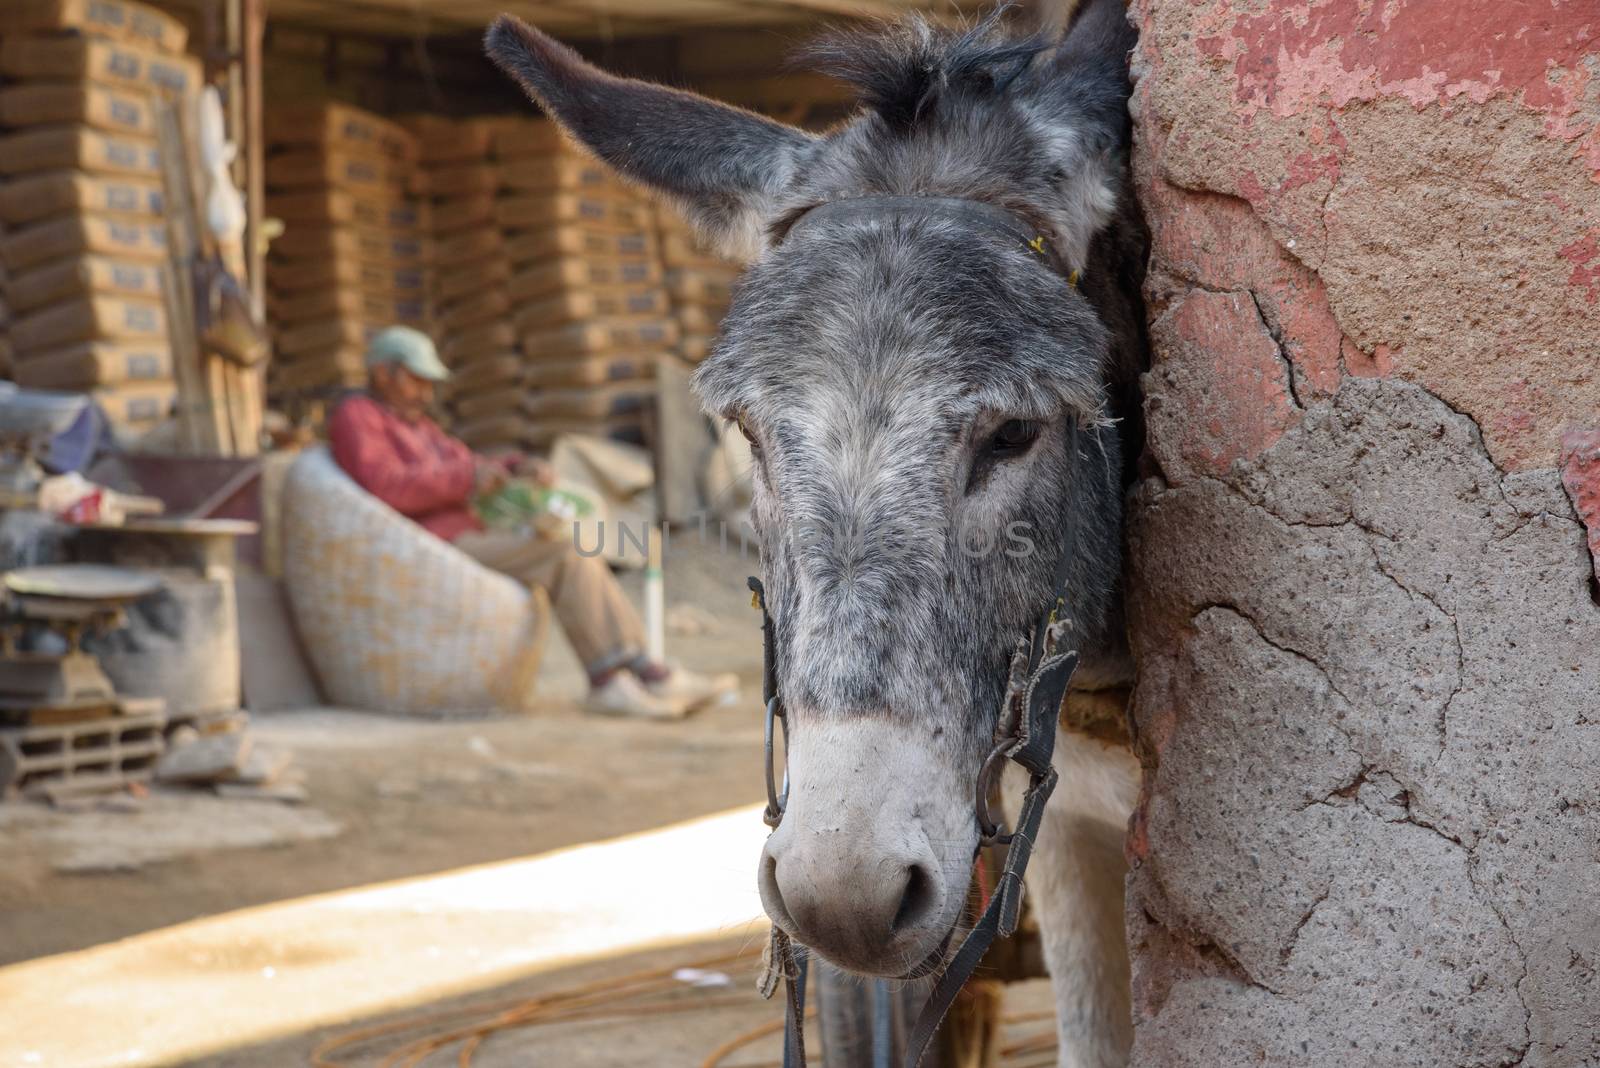 Donkey on the street in Marrakesh, Morocco